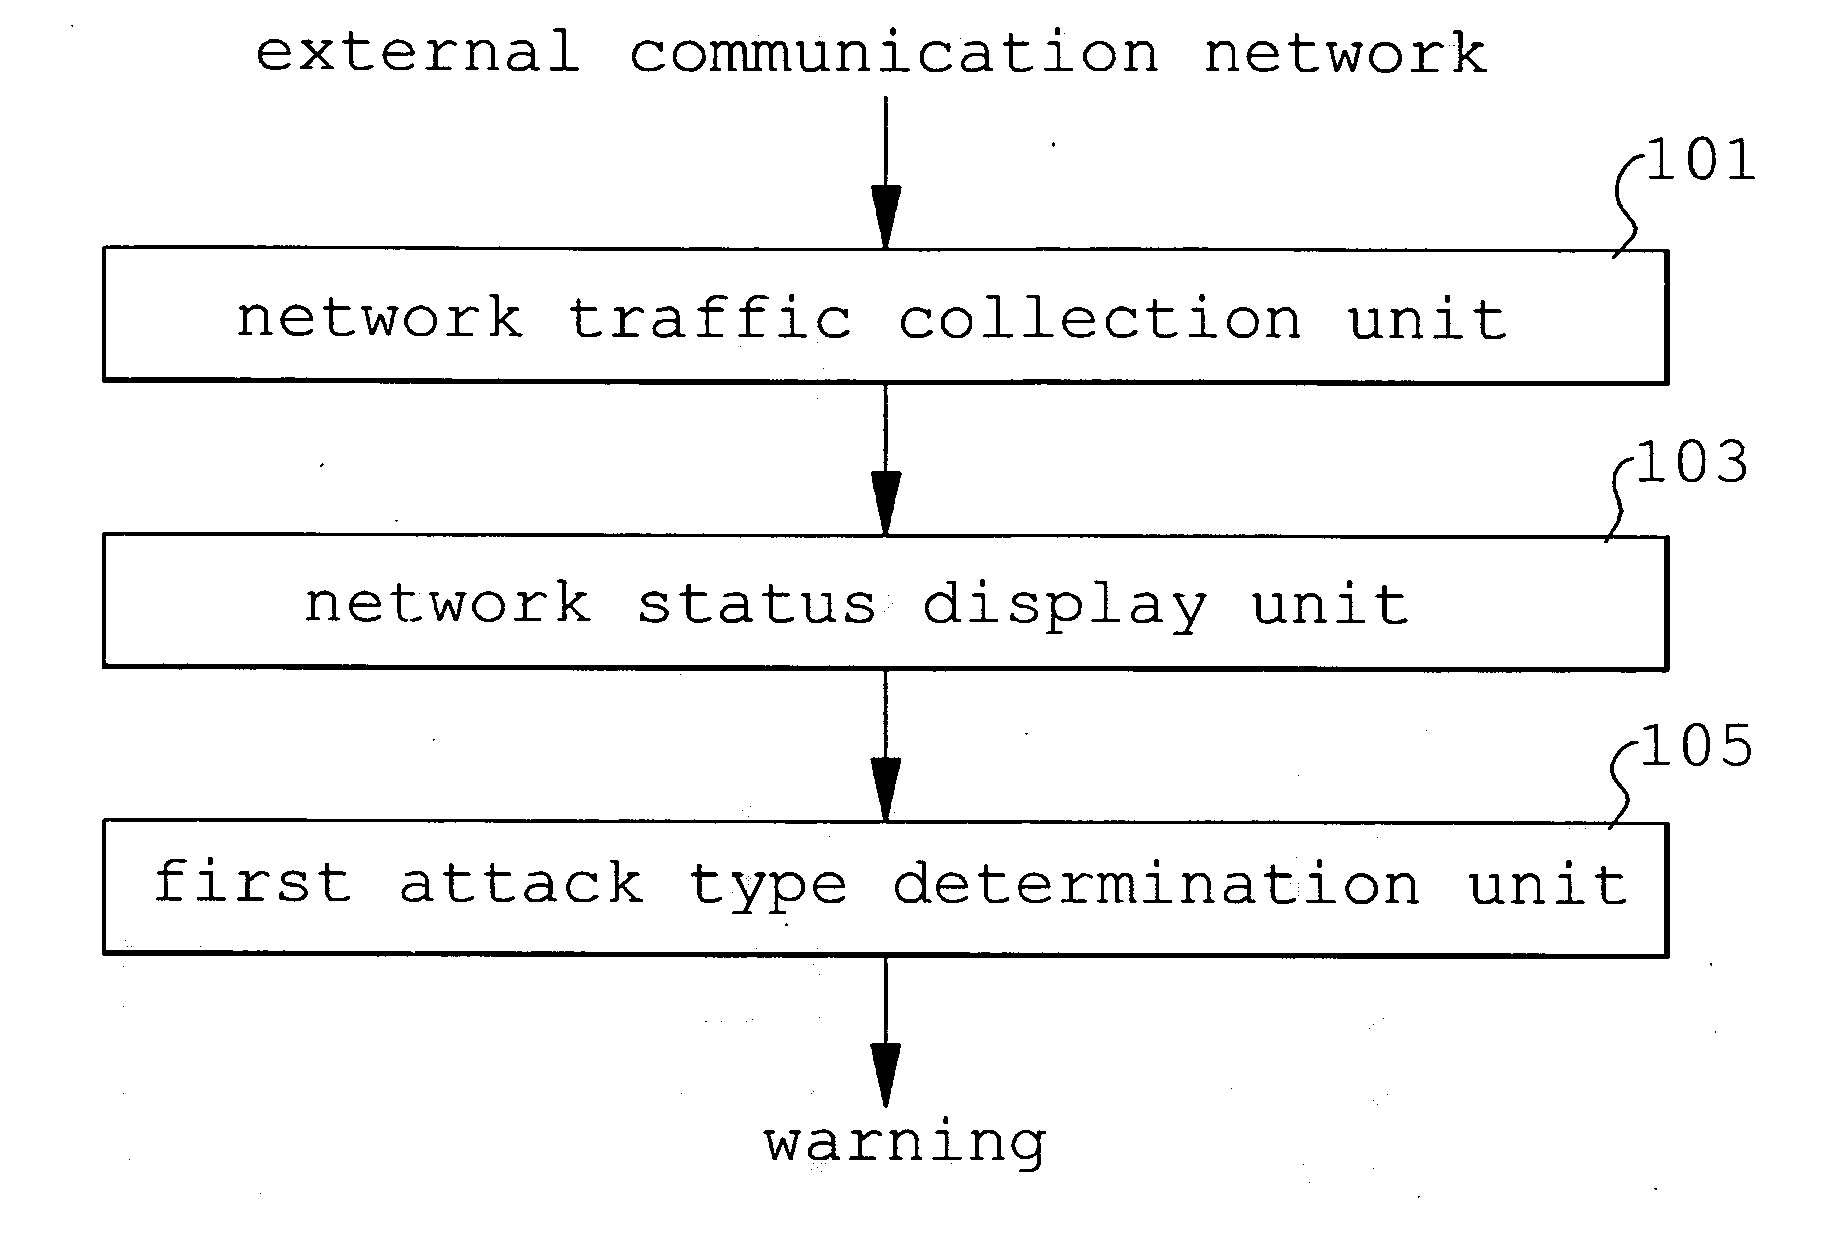 Apparatus for displaying network status